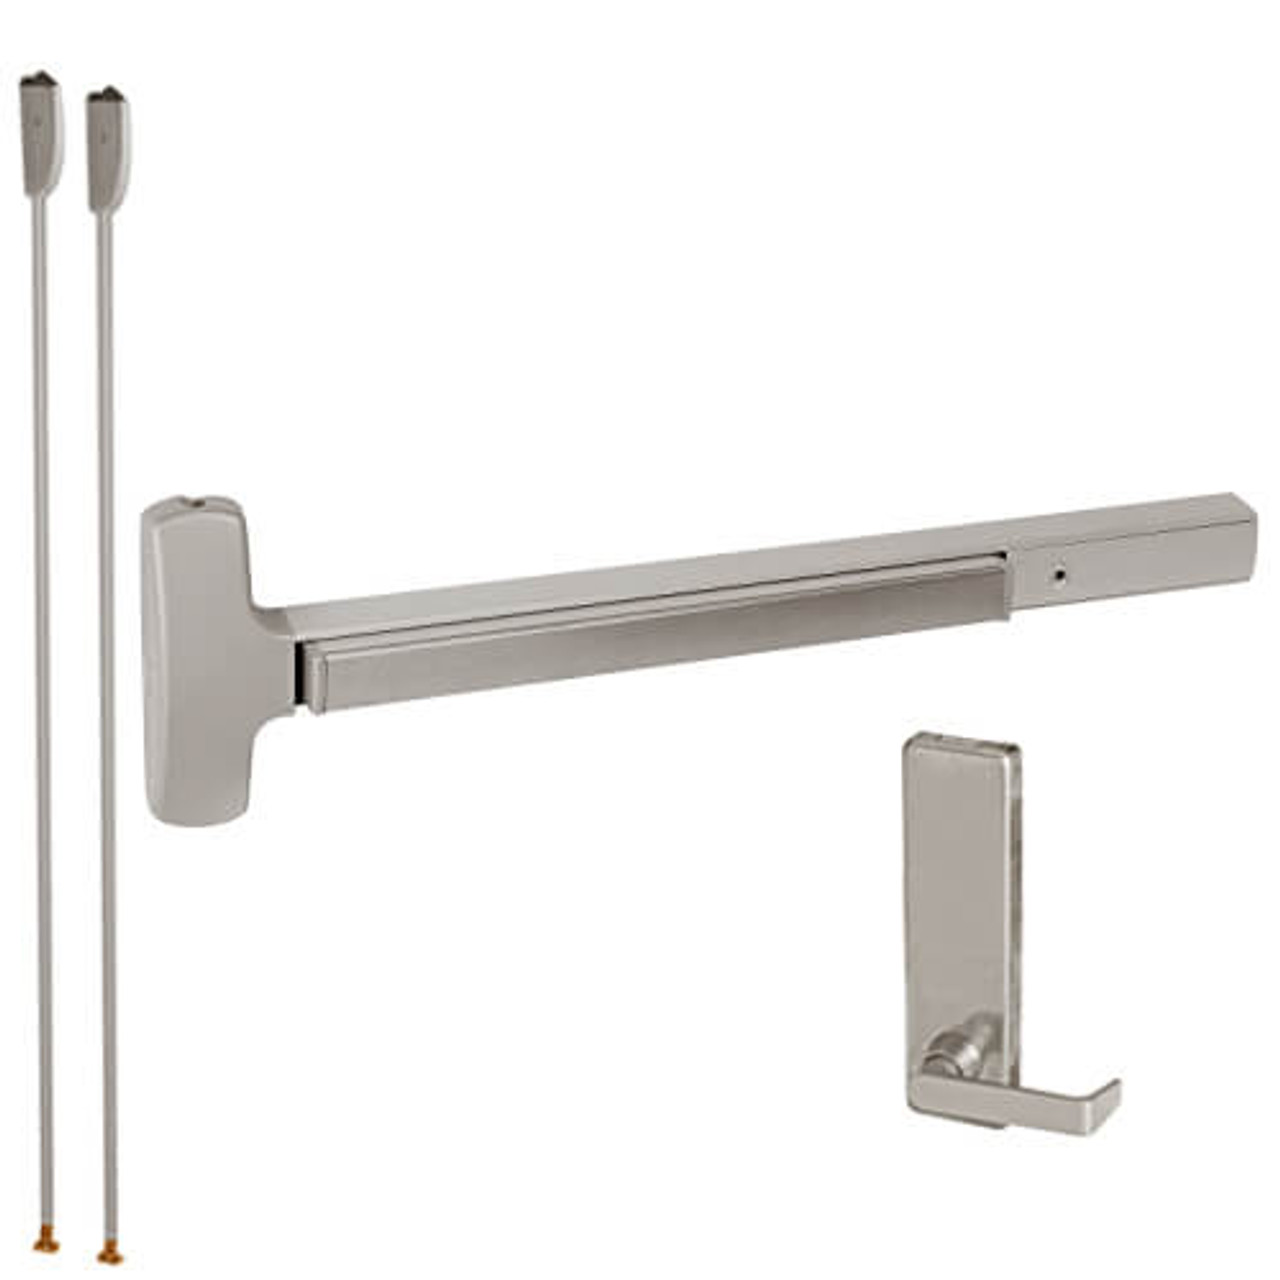 25-V-L-DT-DANE-US32D-2-LHR Falcon Exit Device in Satin Stainless Steel